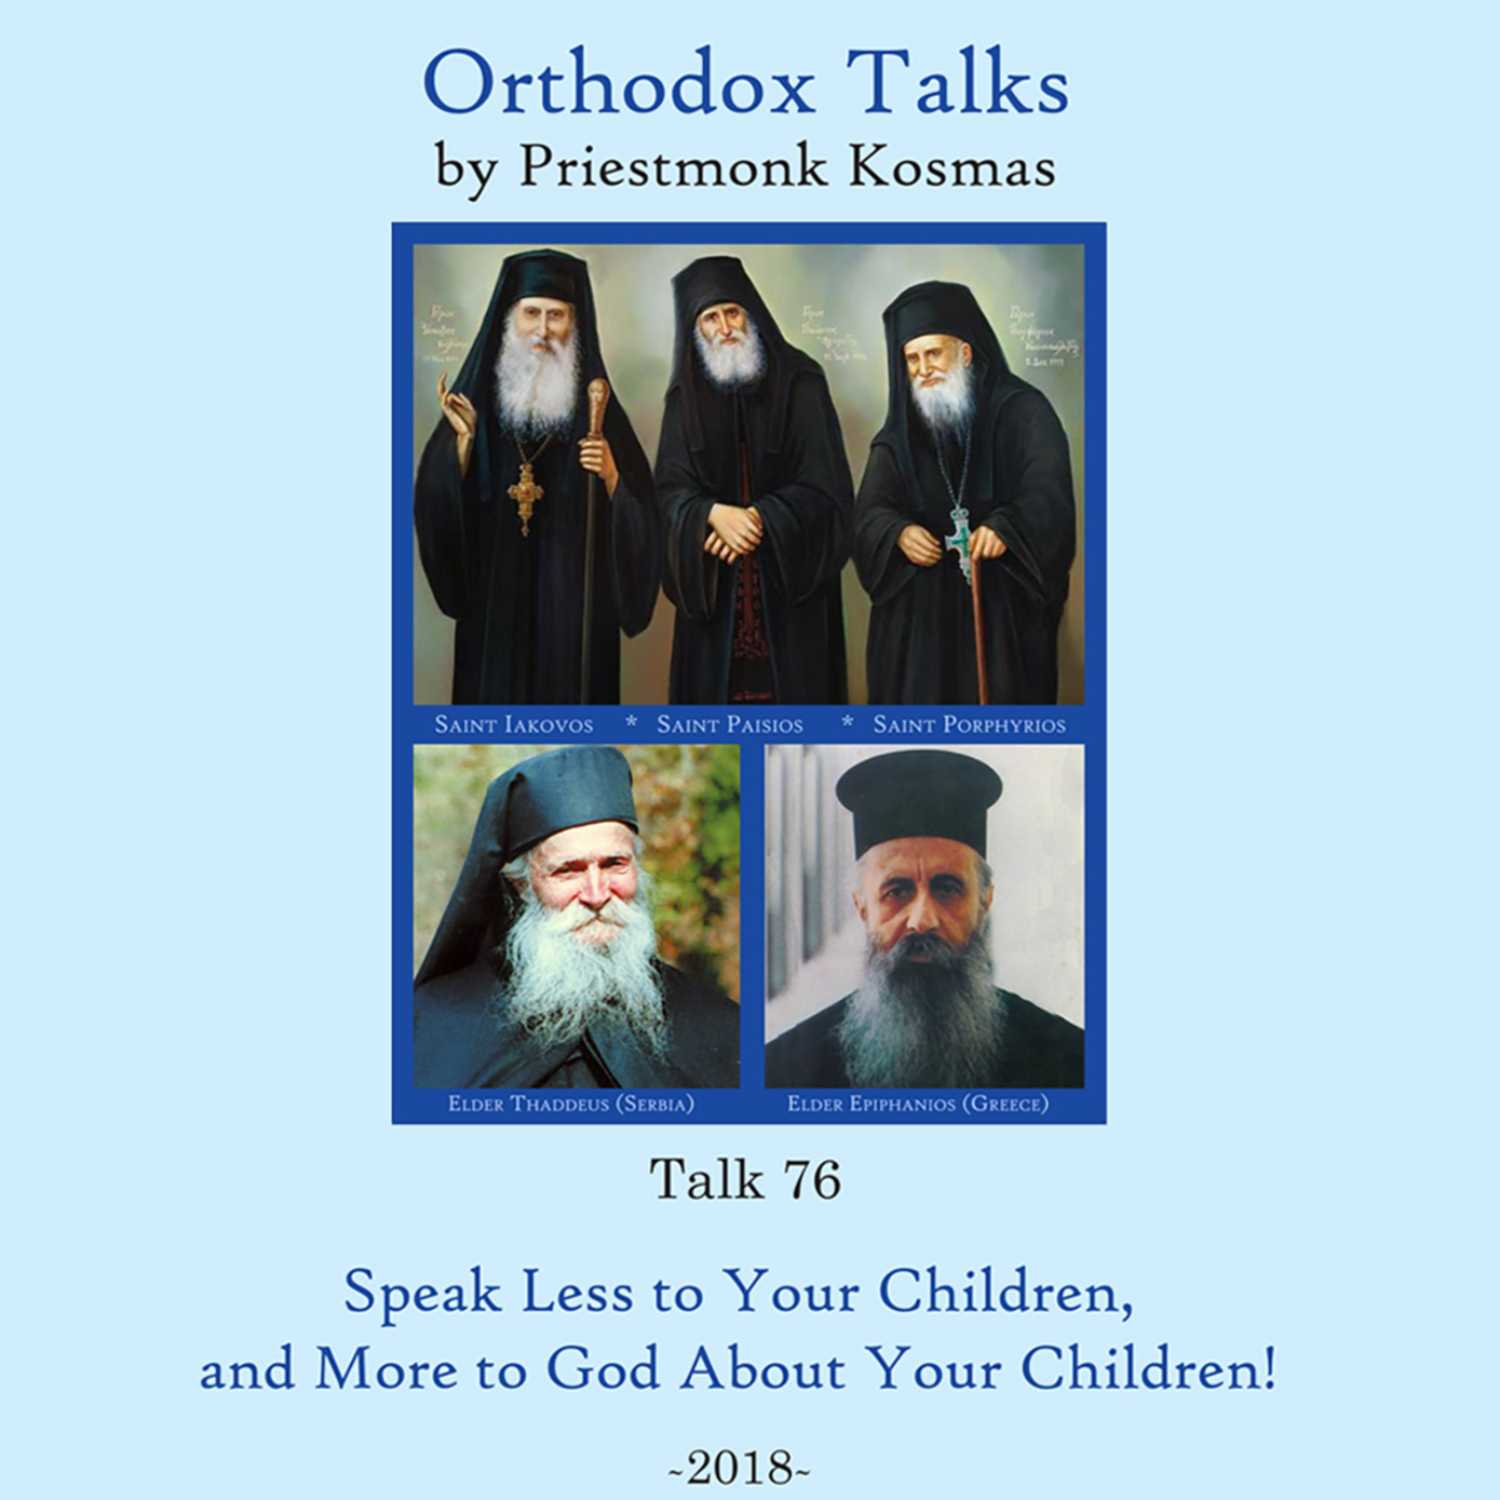 Talk 76: Speak Less to Your Children, and More to God About Your Children!